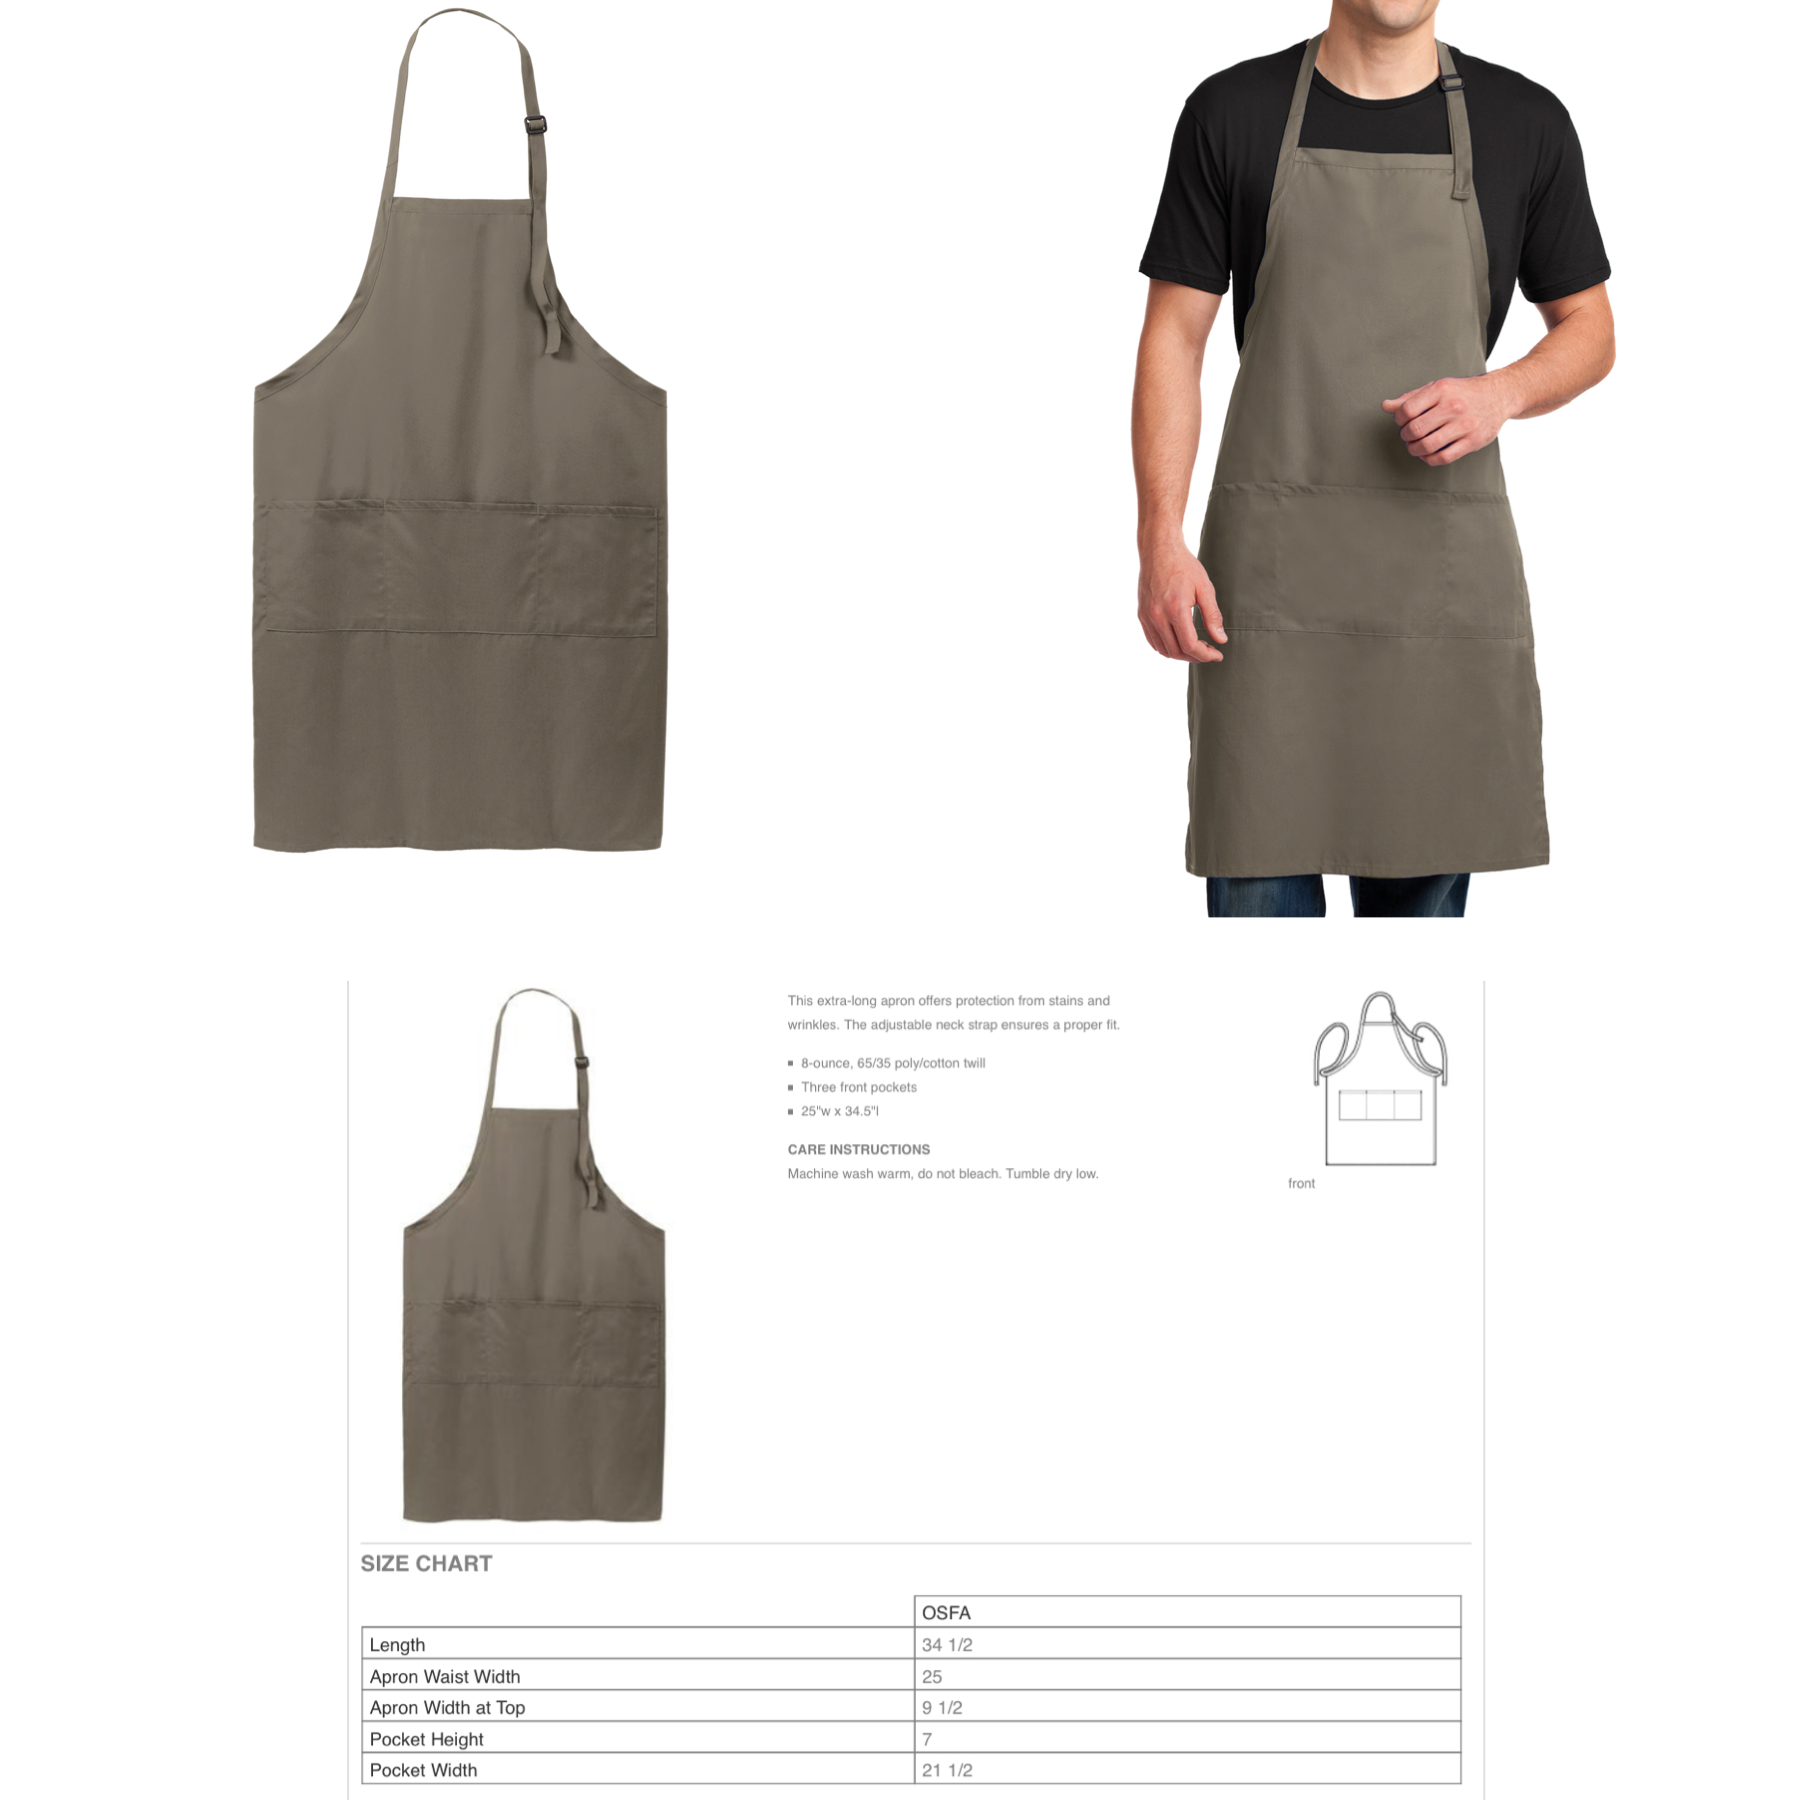 Red Hair Don't Care Embroidered Apron - Craftsman and Canvas Style Options